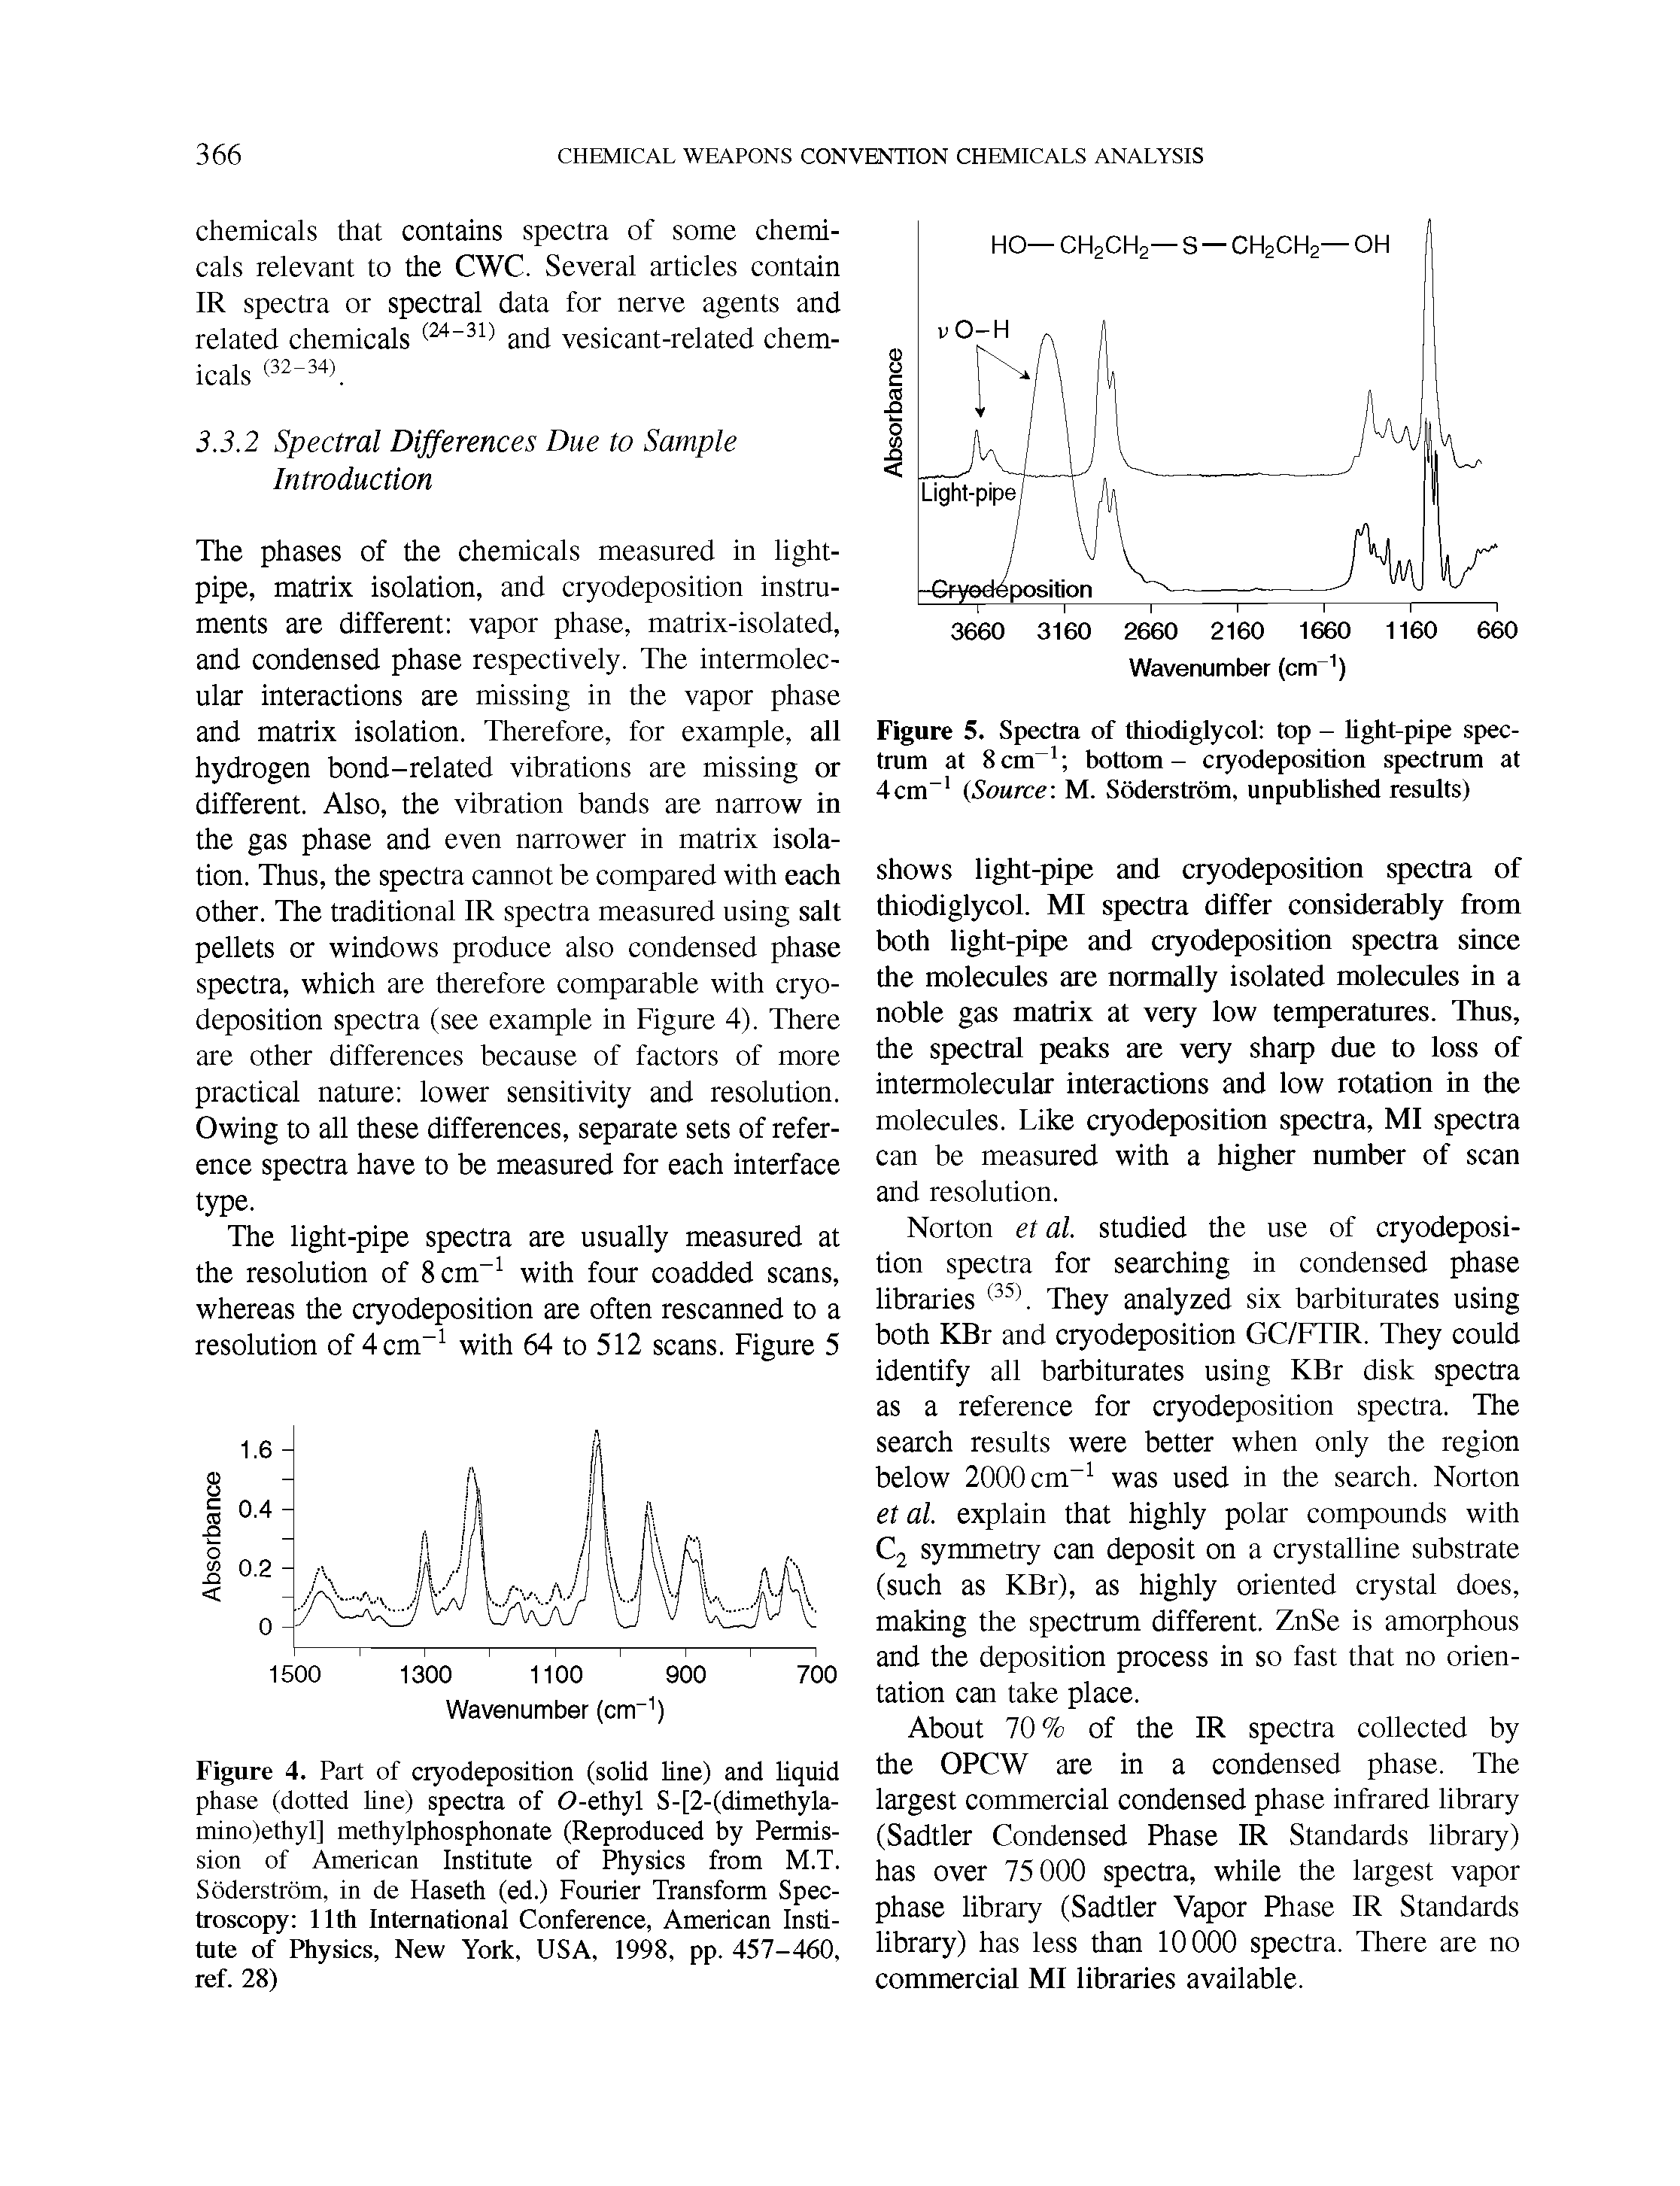 Figure 4. Part of cryodeposition (solid line) and liquid phase (dotted line) spectra of O-ethyl S-[2-(dimethyla-mino)ethyl] methylphosphonate (Reproduced by Permission of American Institute of Physics from M.T. Soderstrom, in de Haseth (ed.) Fourier Transform Spectroscopy 11th International Conference, American Institute of Physics, New York, USA, 1998, pp. 457-460, ref. 28)...